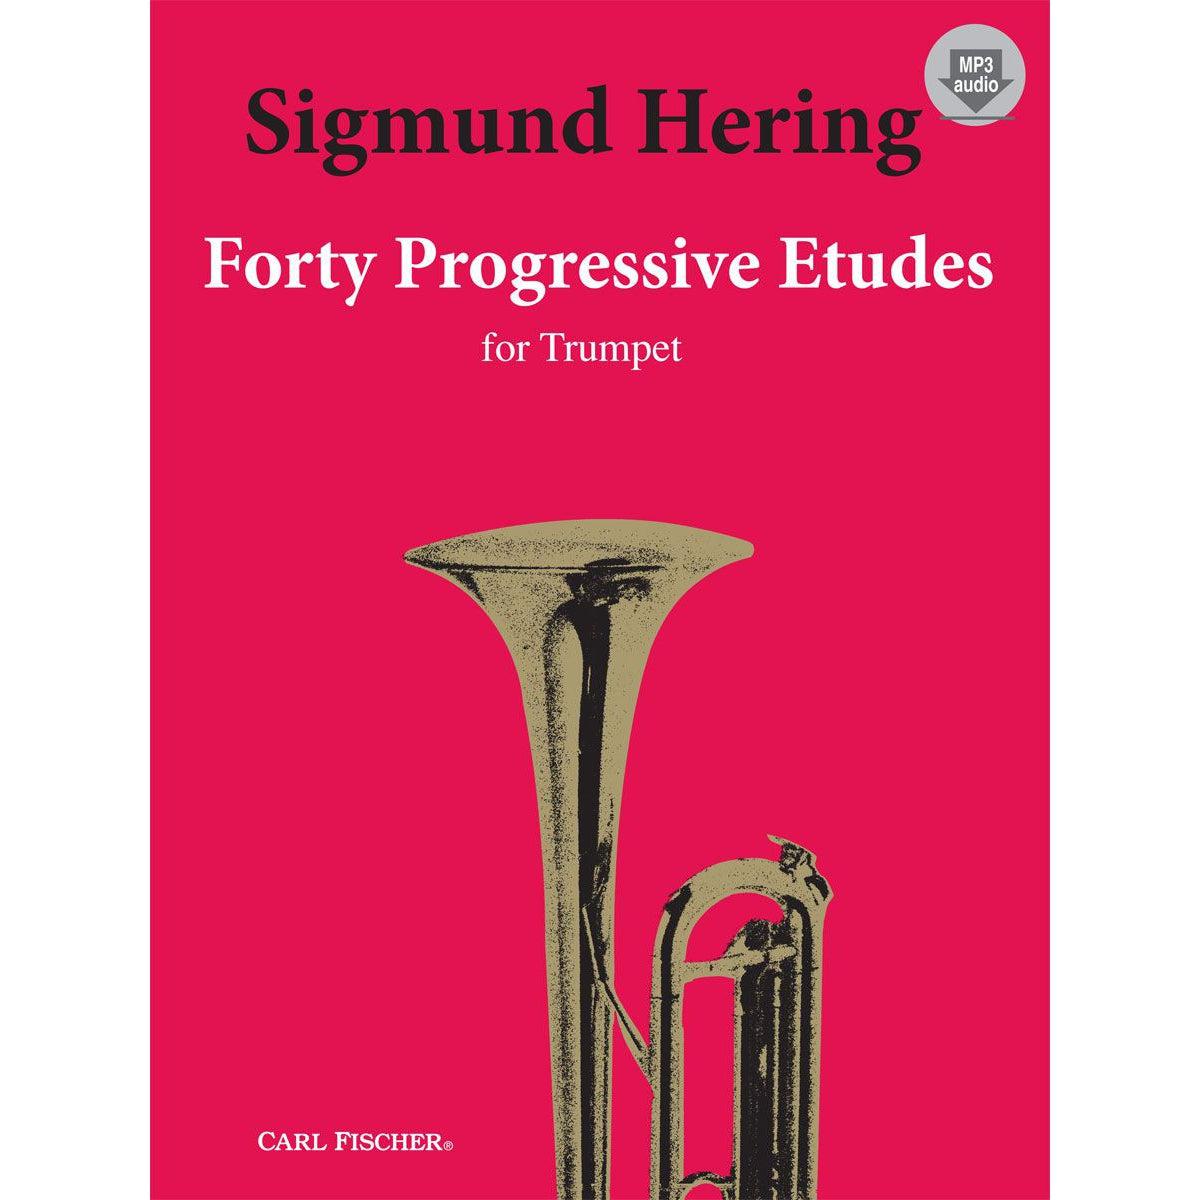 Forty Progressive Etudes For Trumpet Sigmund Hering-Andy's Music